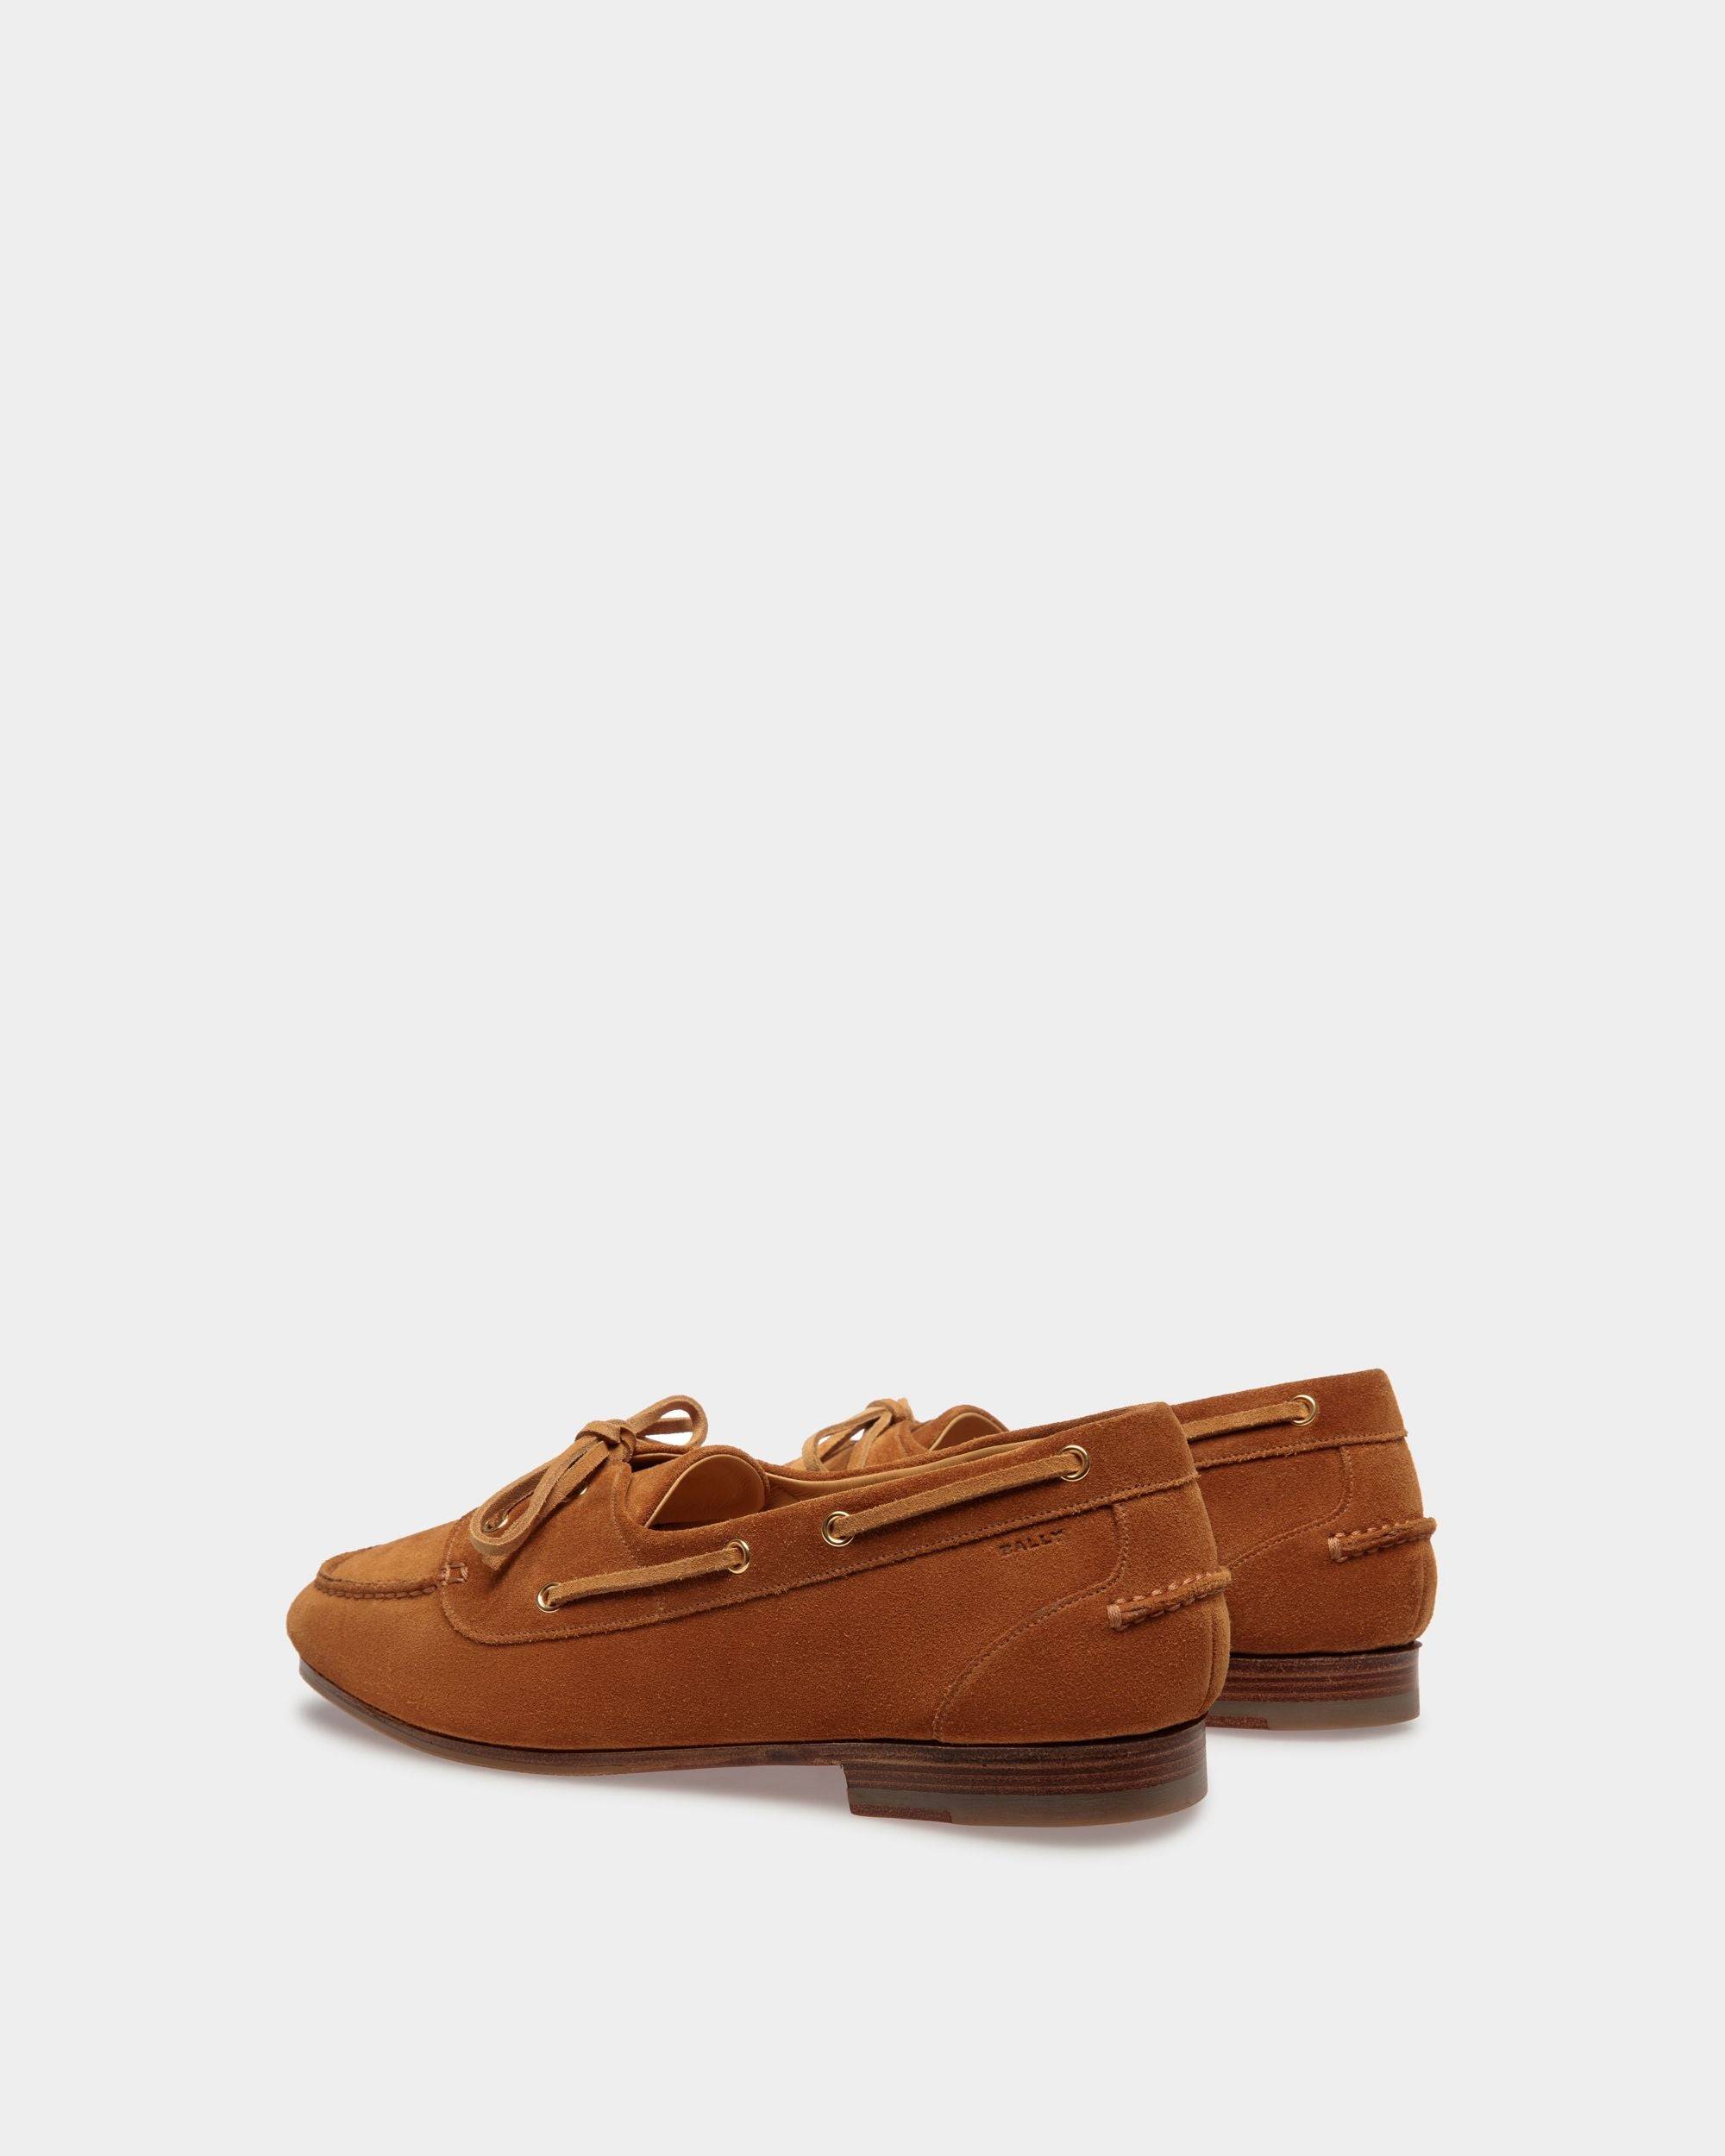 Plume | Men's Moccasin in Brown Suede| Bally | Still Life 3/4 Back